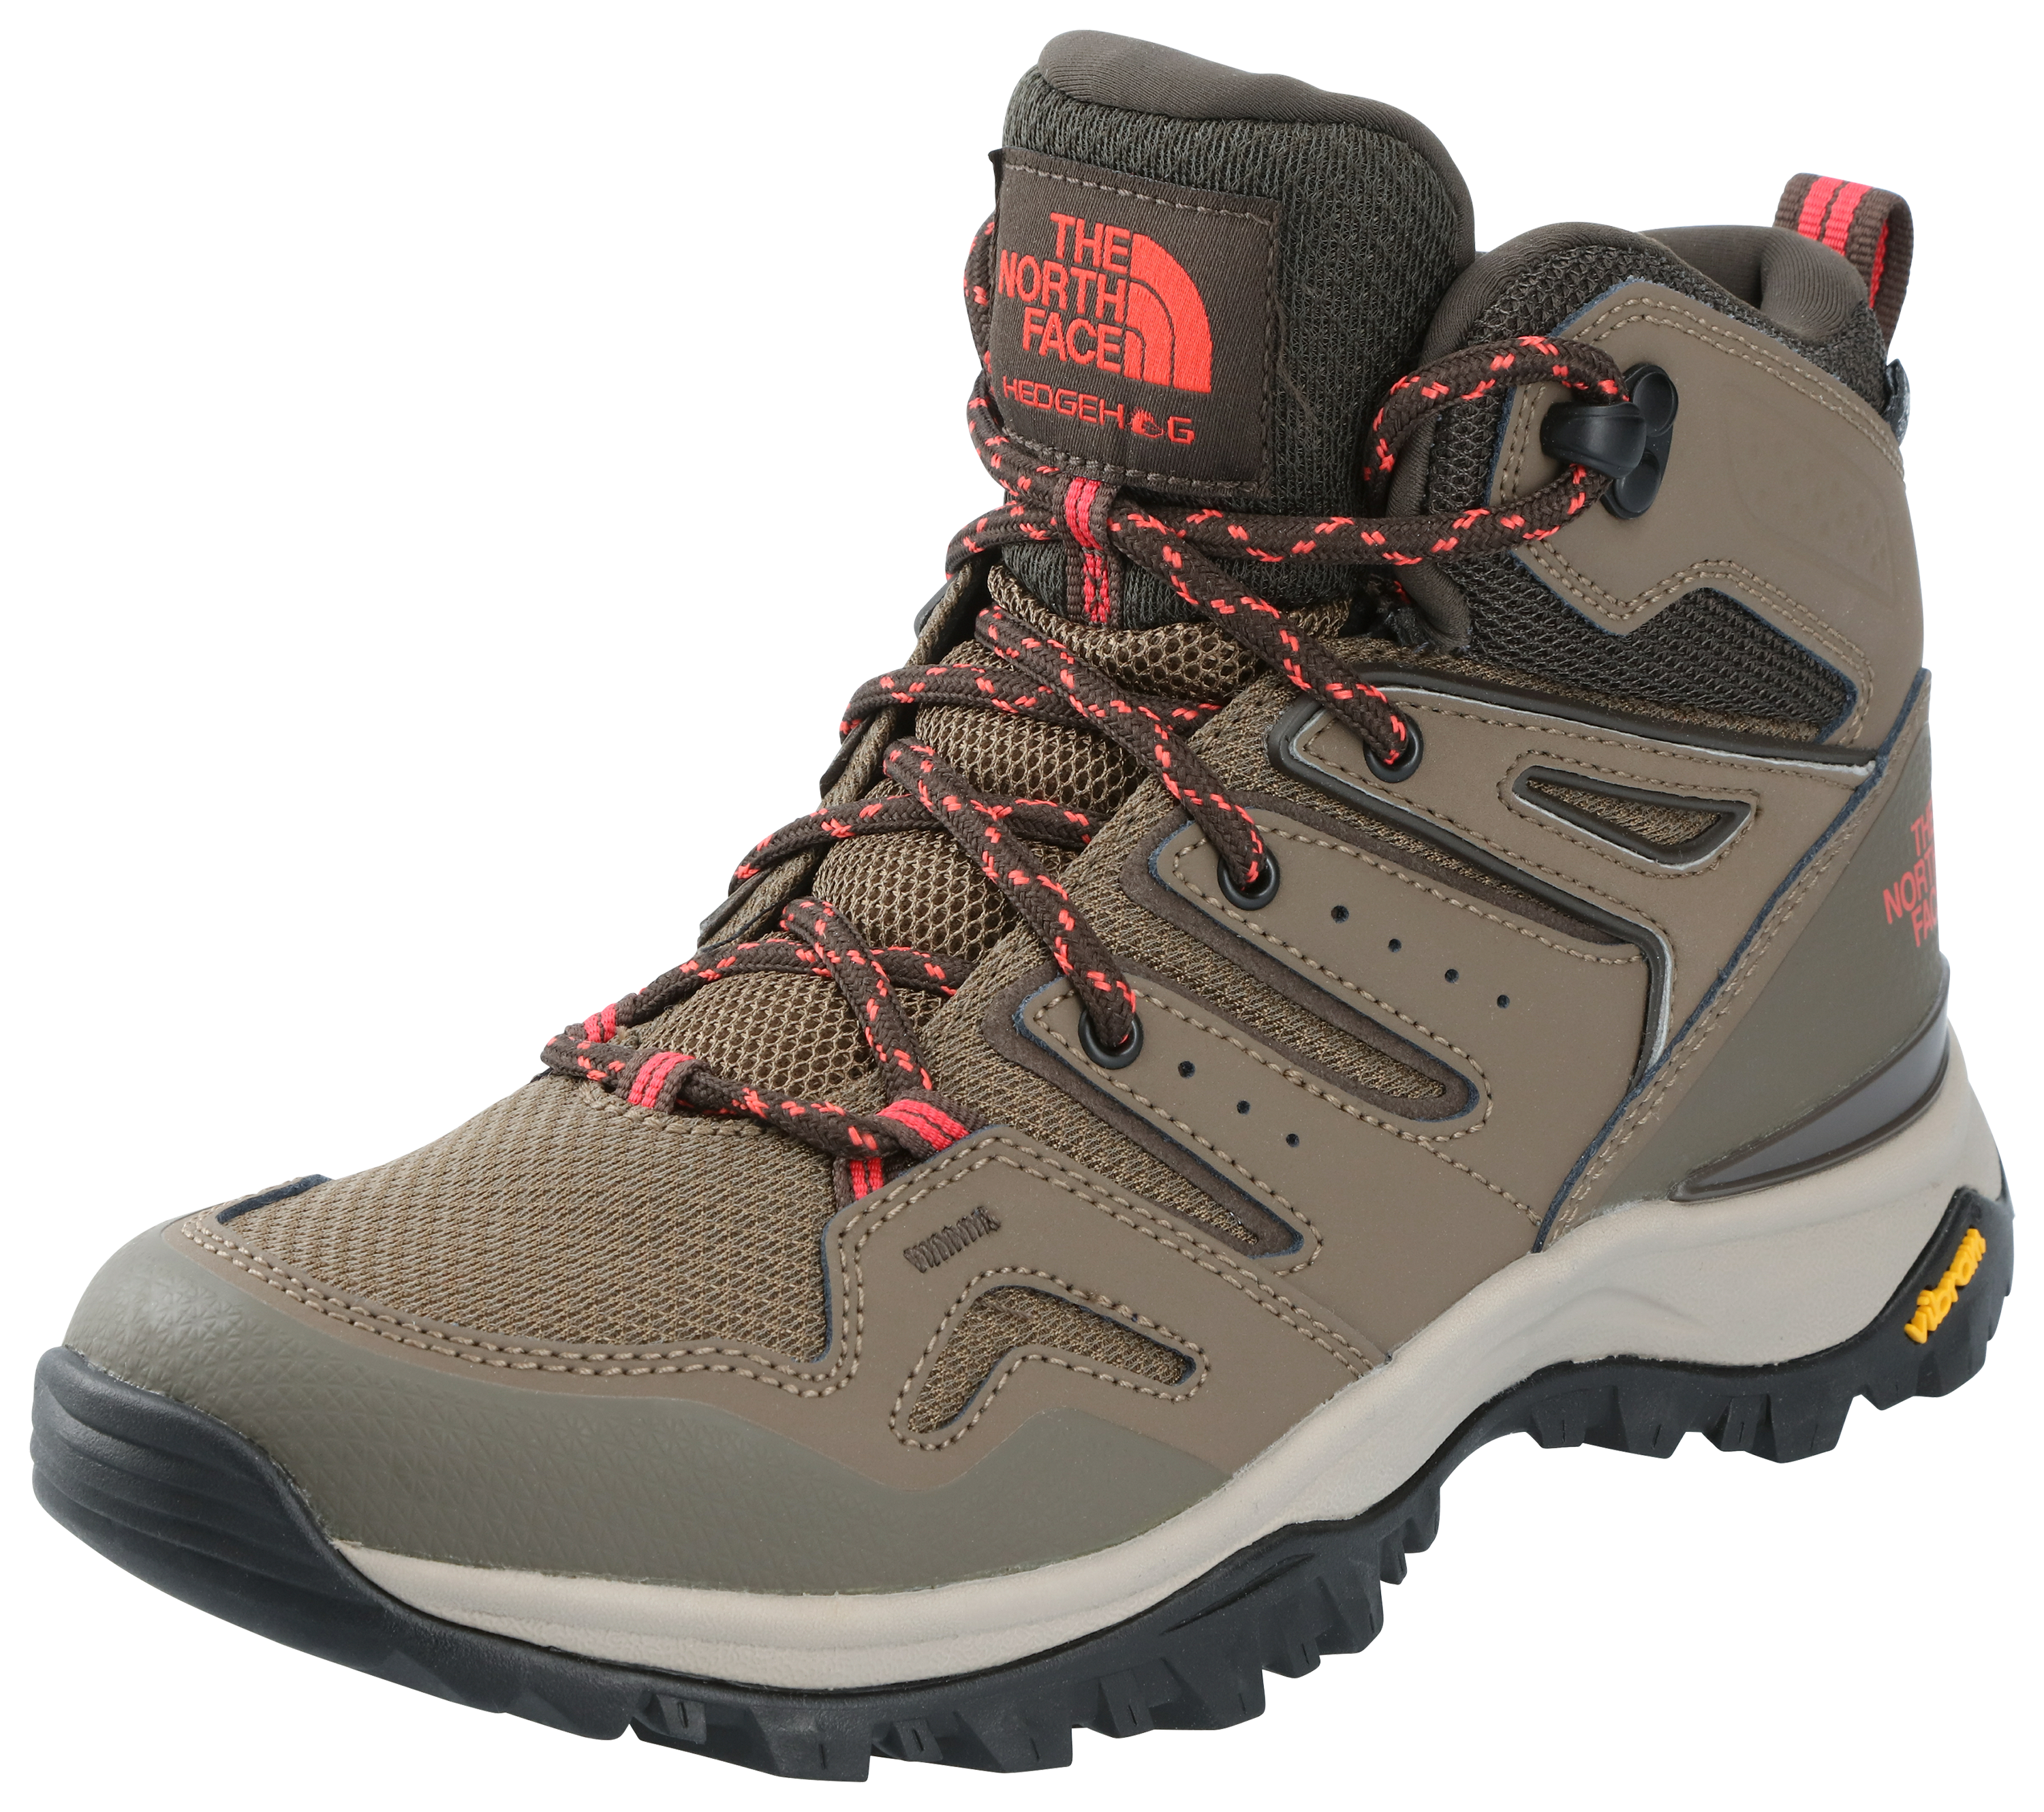 The North Face Hedgehog Fastpack II Mid Waterproof Hiking Boots for ...